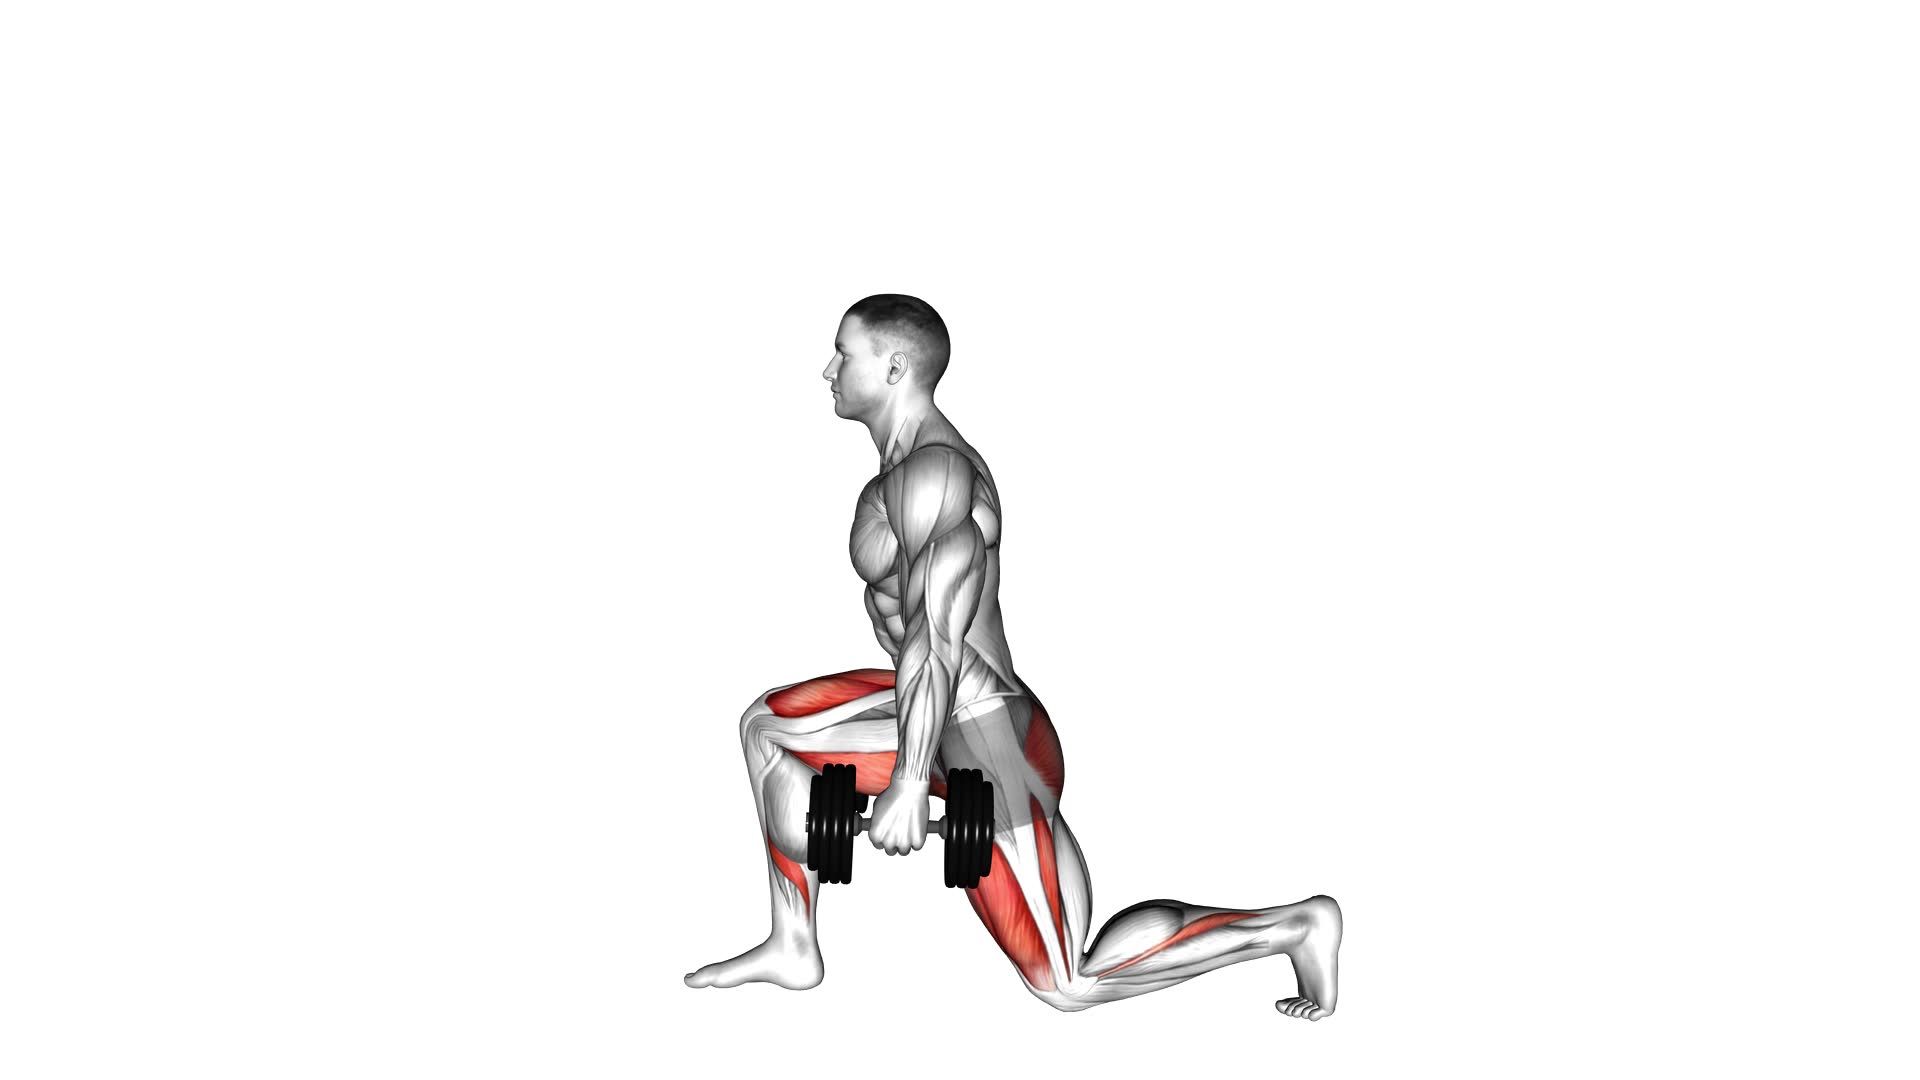 Dumbbell Static Lunge - Video Exercise Guide & Tips